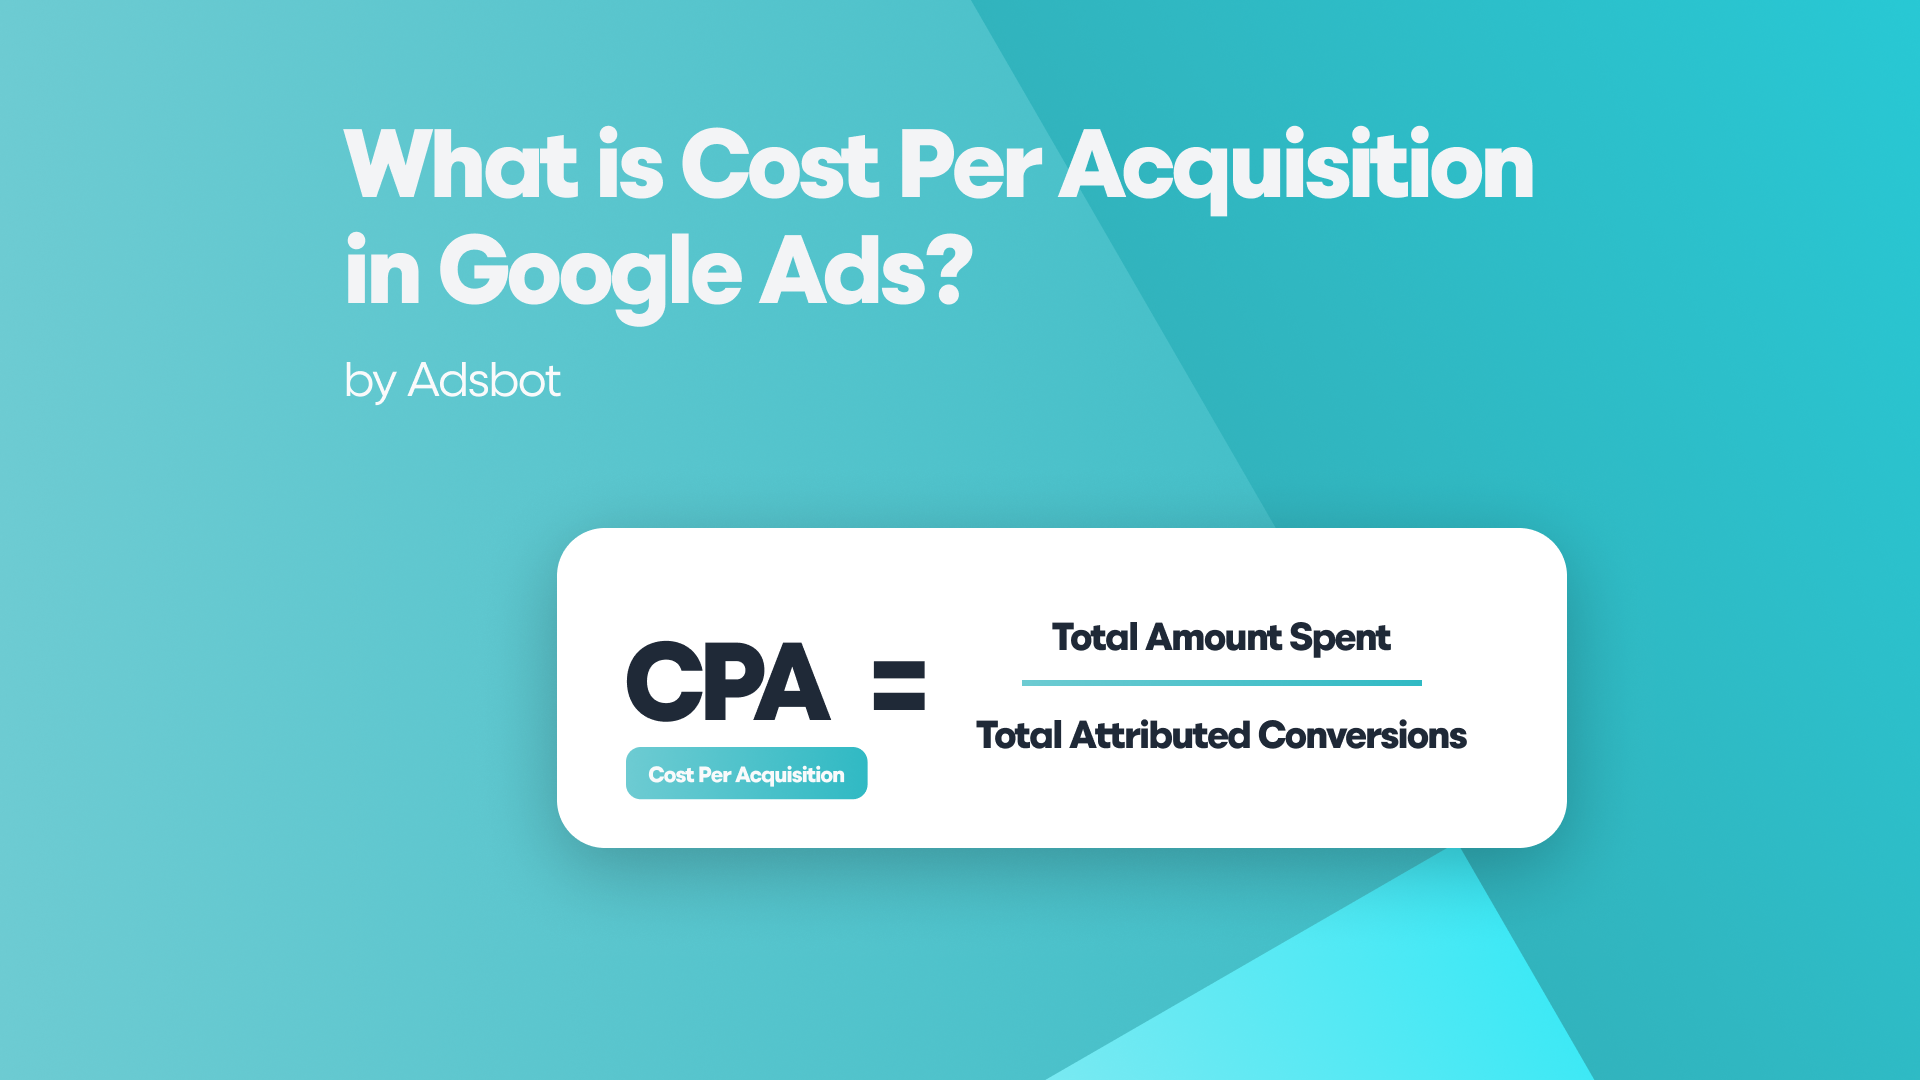 What is Cost Per Acquisition in Google Ads?